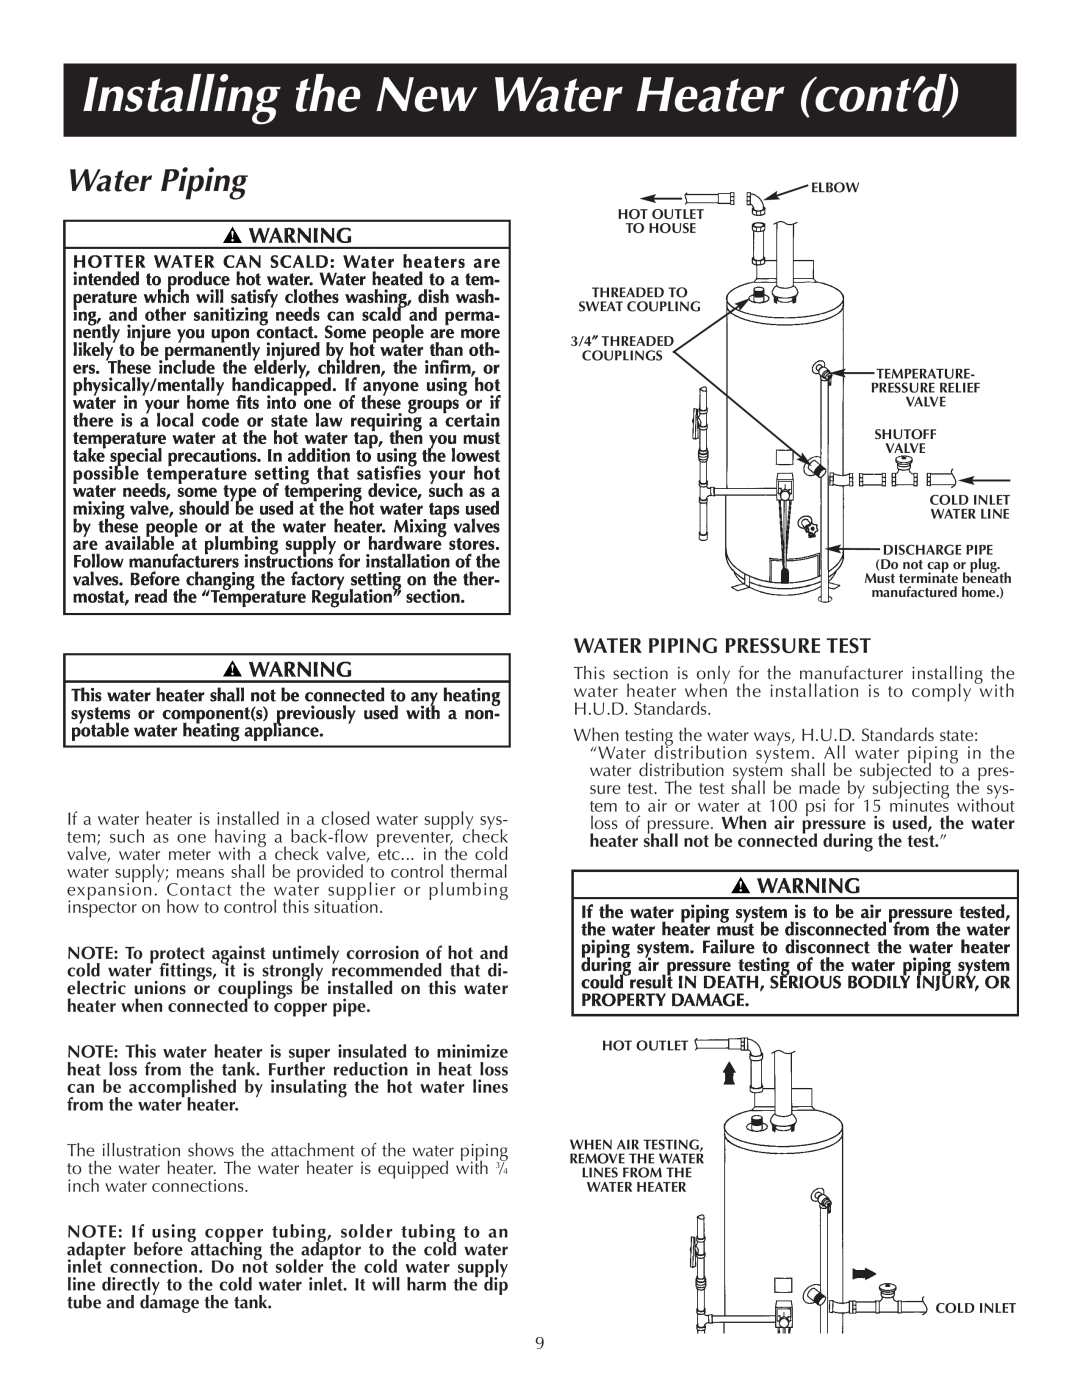 Reliance Water Heaters 184123-000 instruction manual Installing the New Water Heater cont’d, Water Piping 